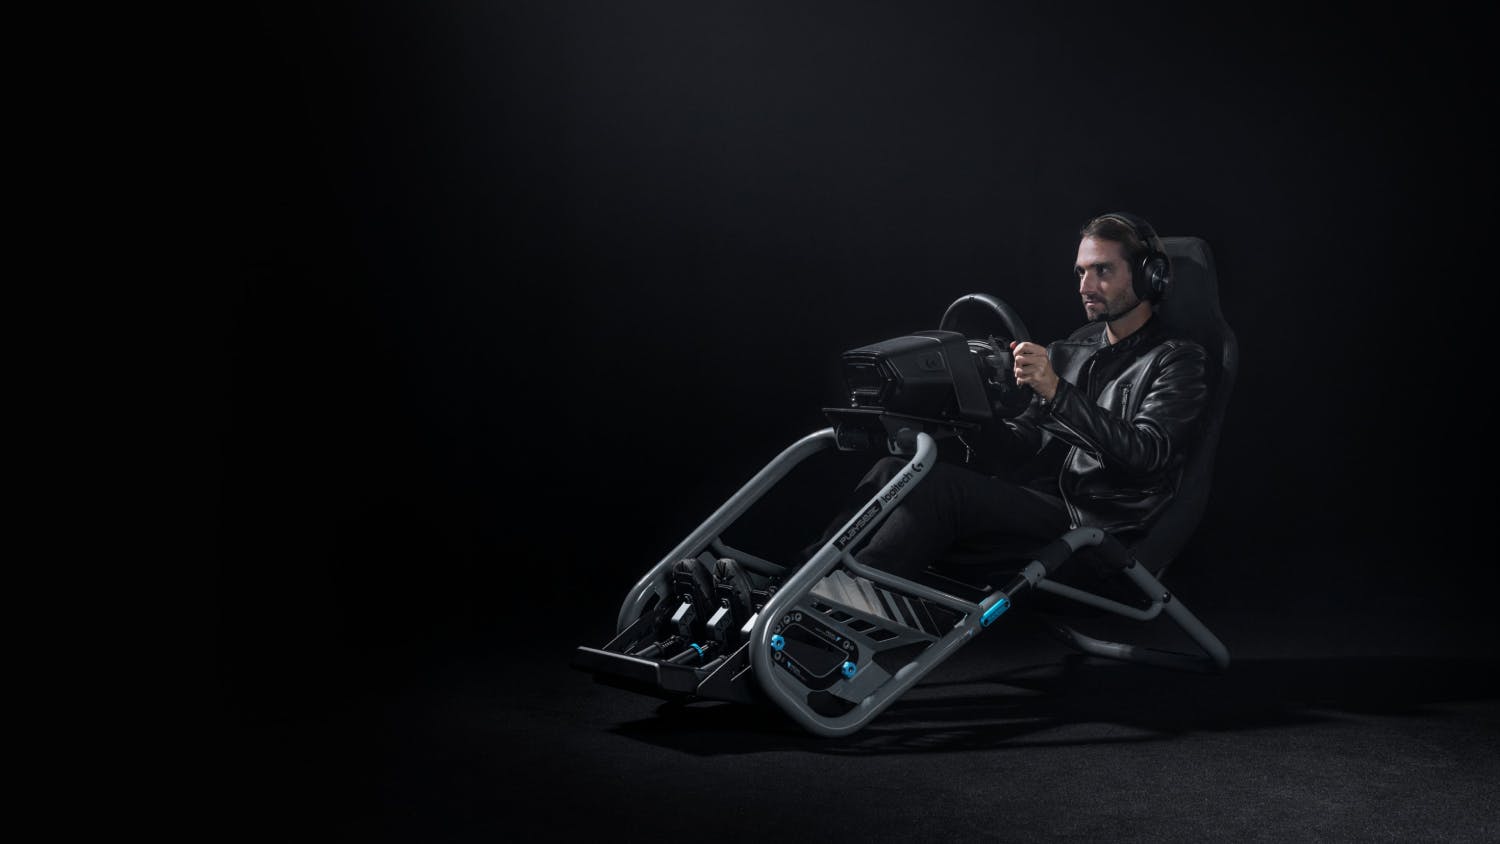 Playseat Trophy Logitech G Edition is a high-end chair made for